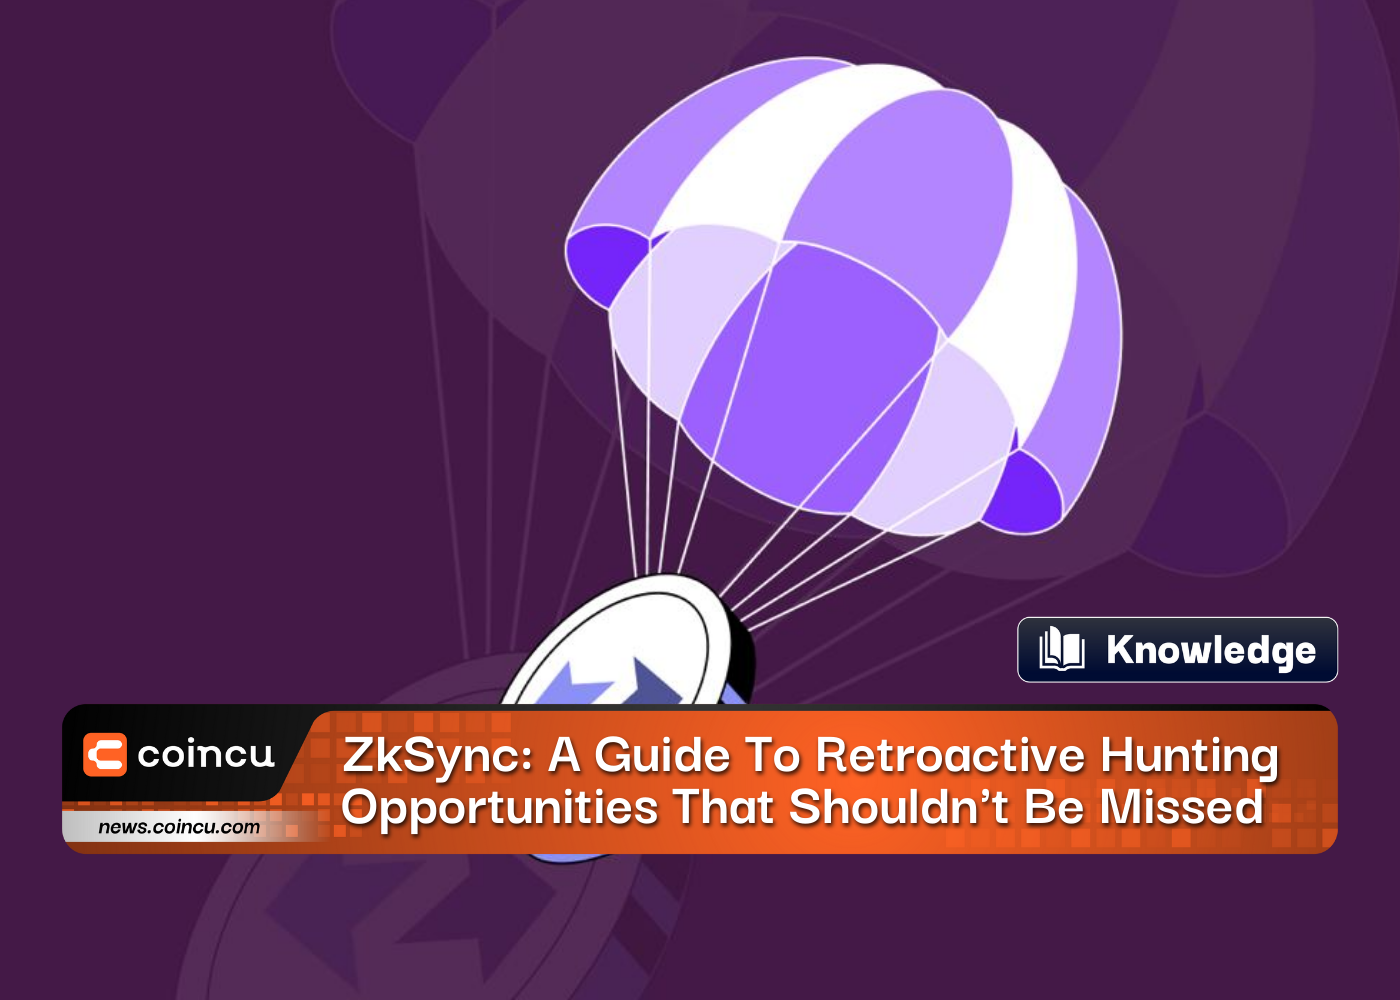 ZkSync: A Guide To Retroactive Hunting Opportunities That Shouldn't Be Missed